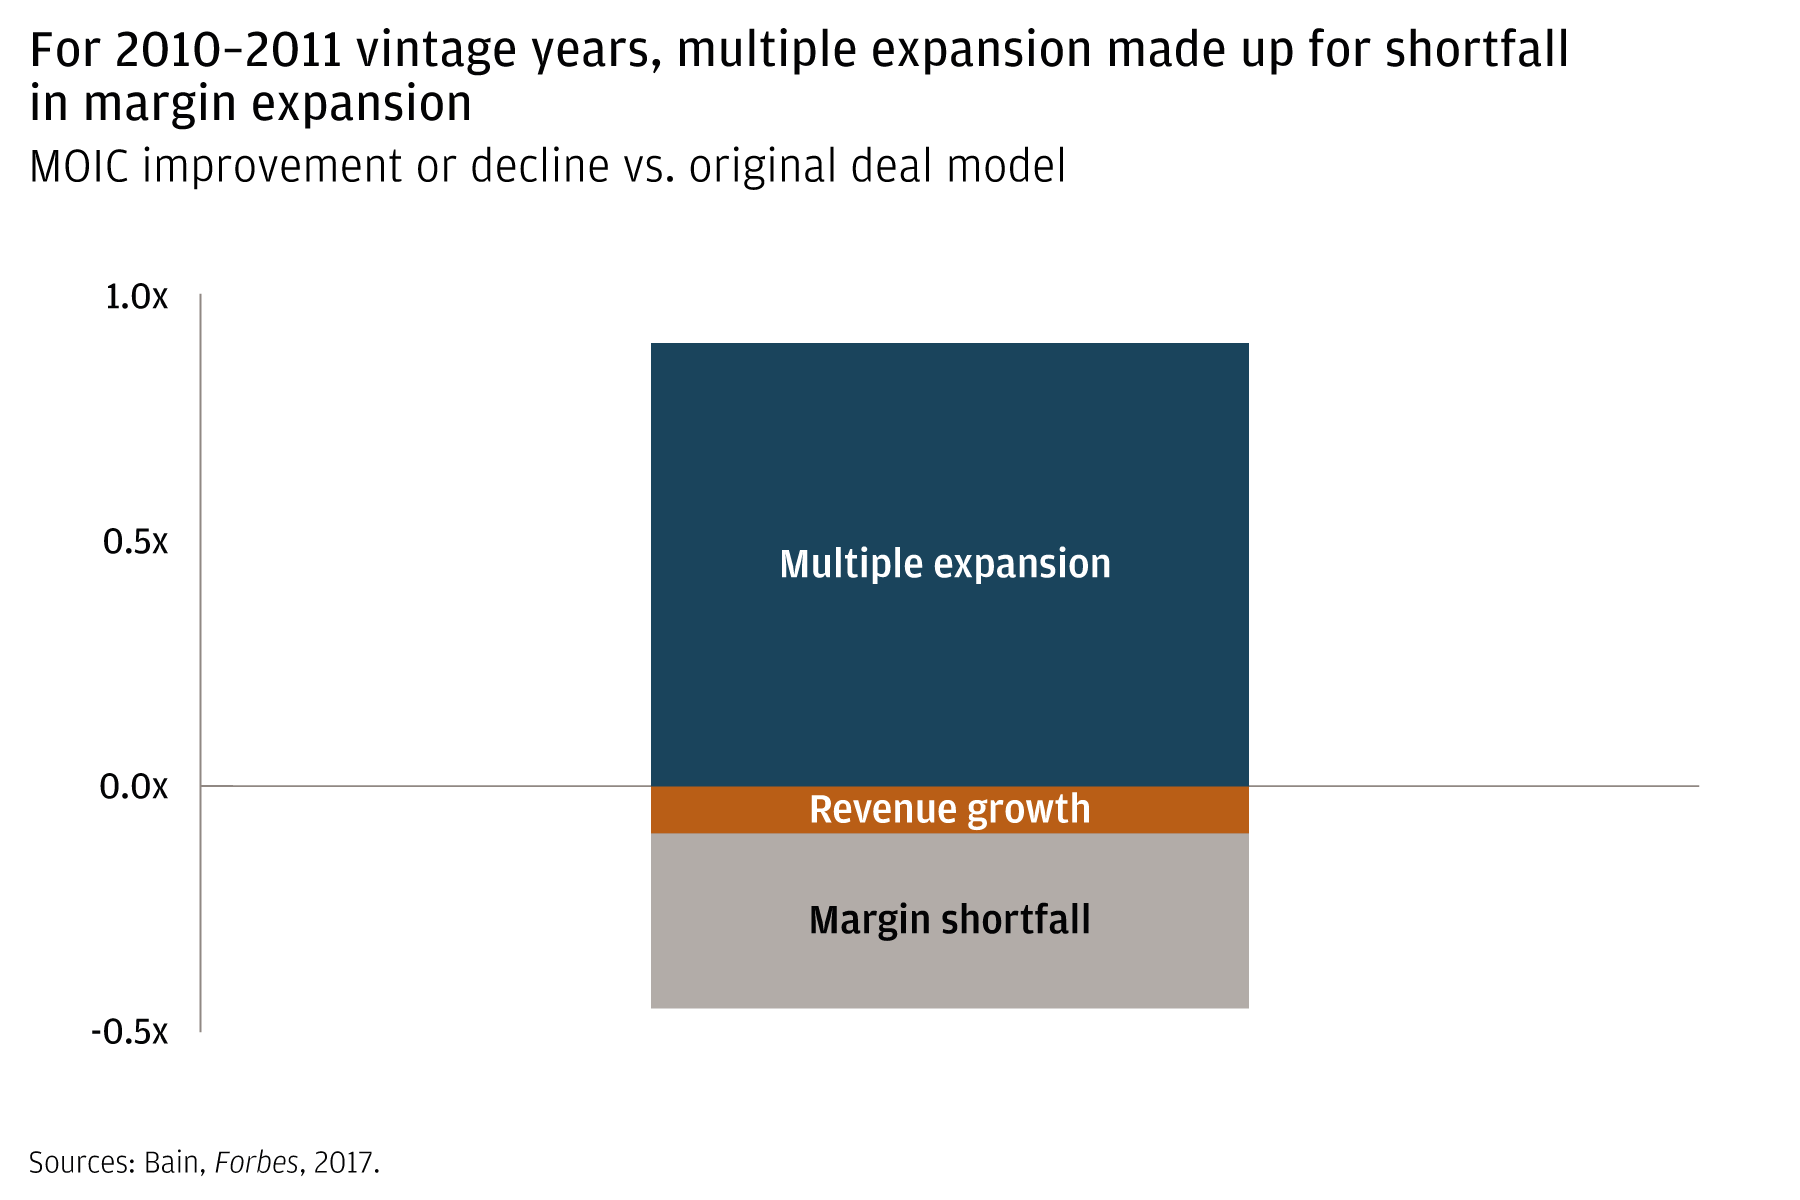 Bar chart illustrating the fact that gains from multiple expansion are larger than losses from margin shortfall